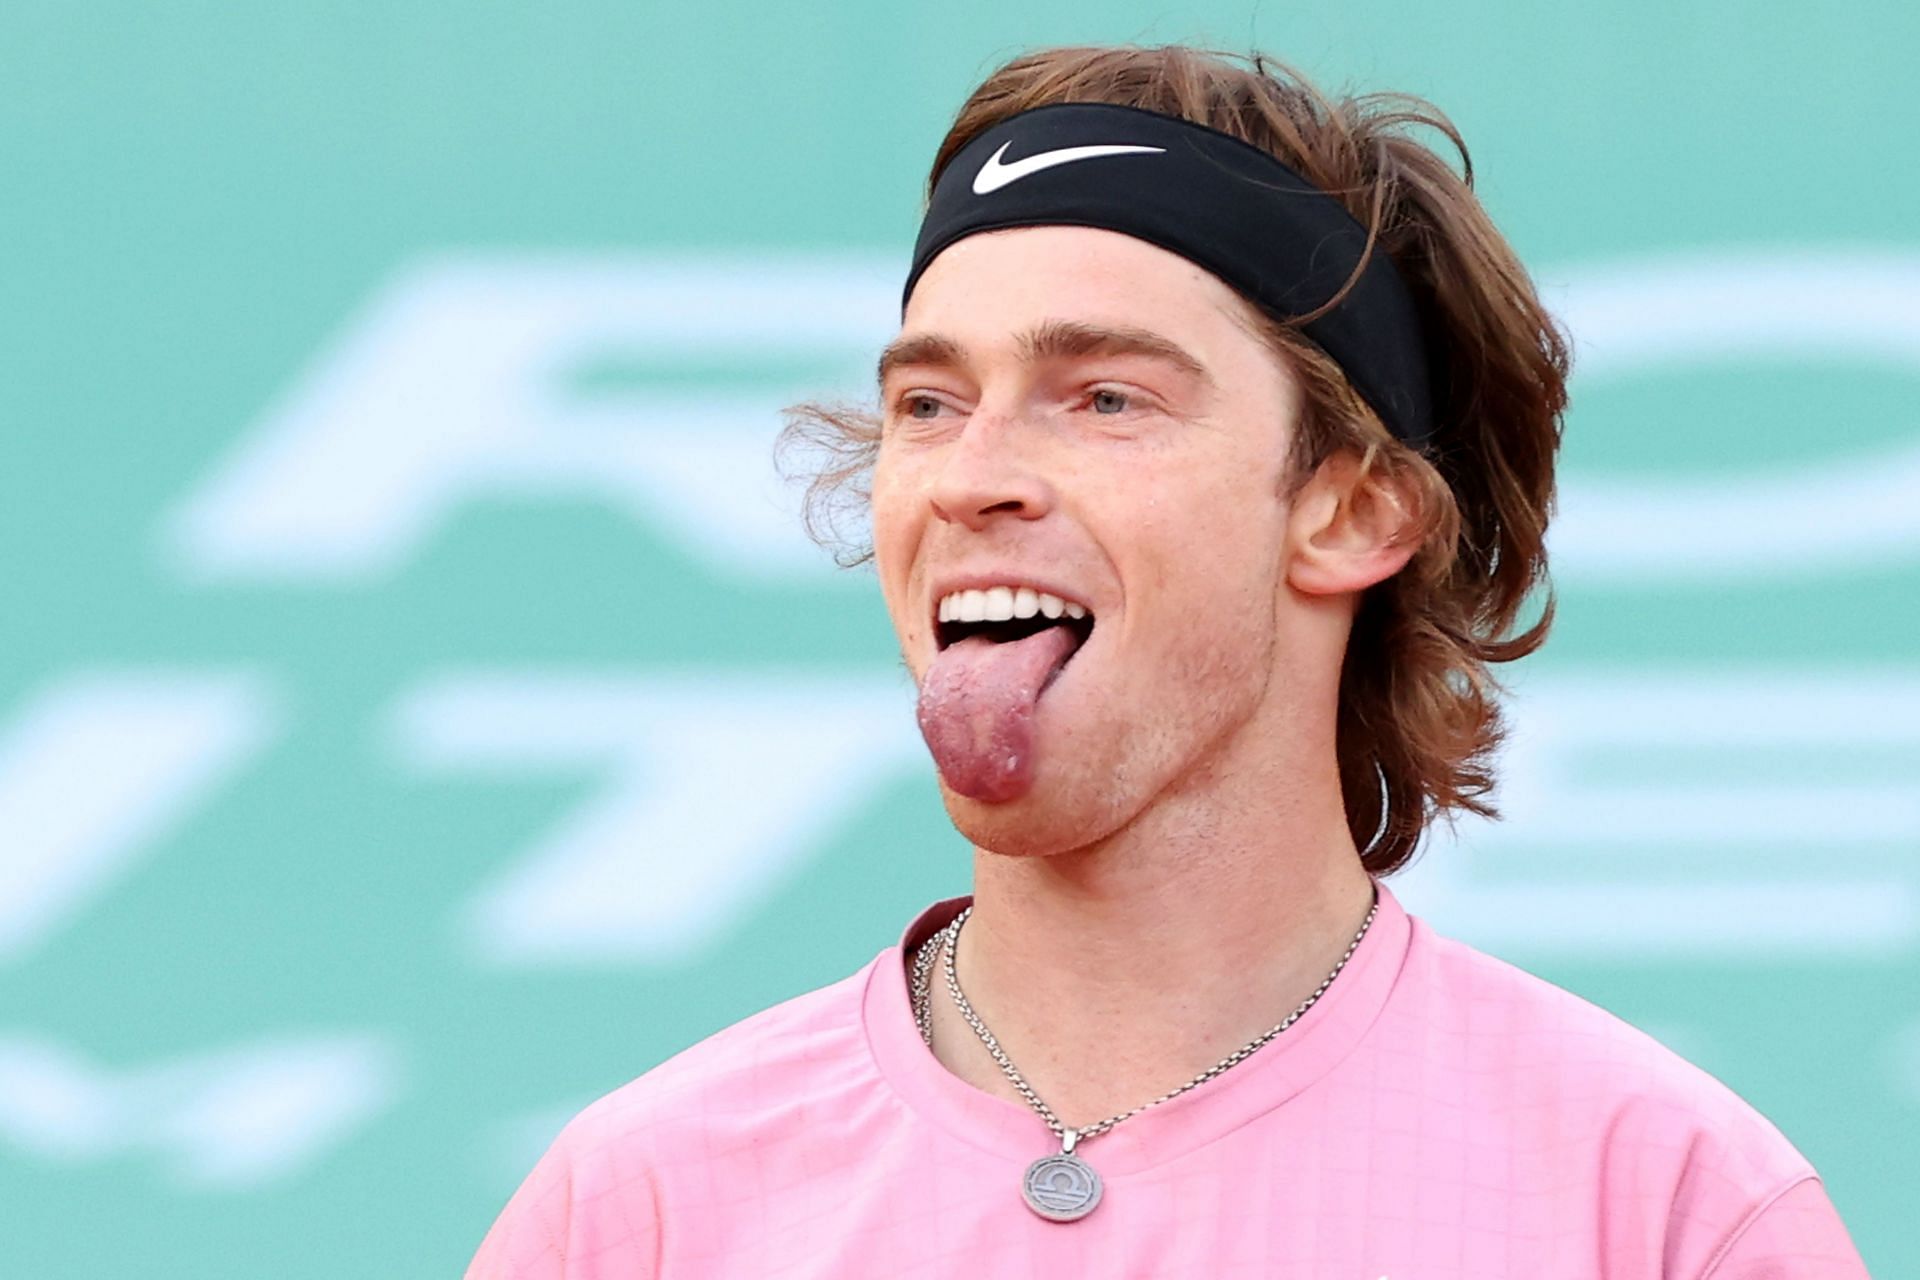 Andrey Rublev at the Rolex Monte-Carlo Masters